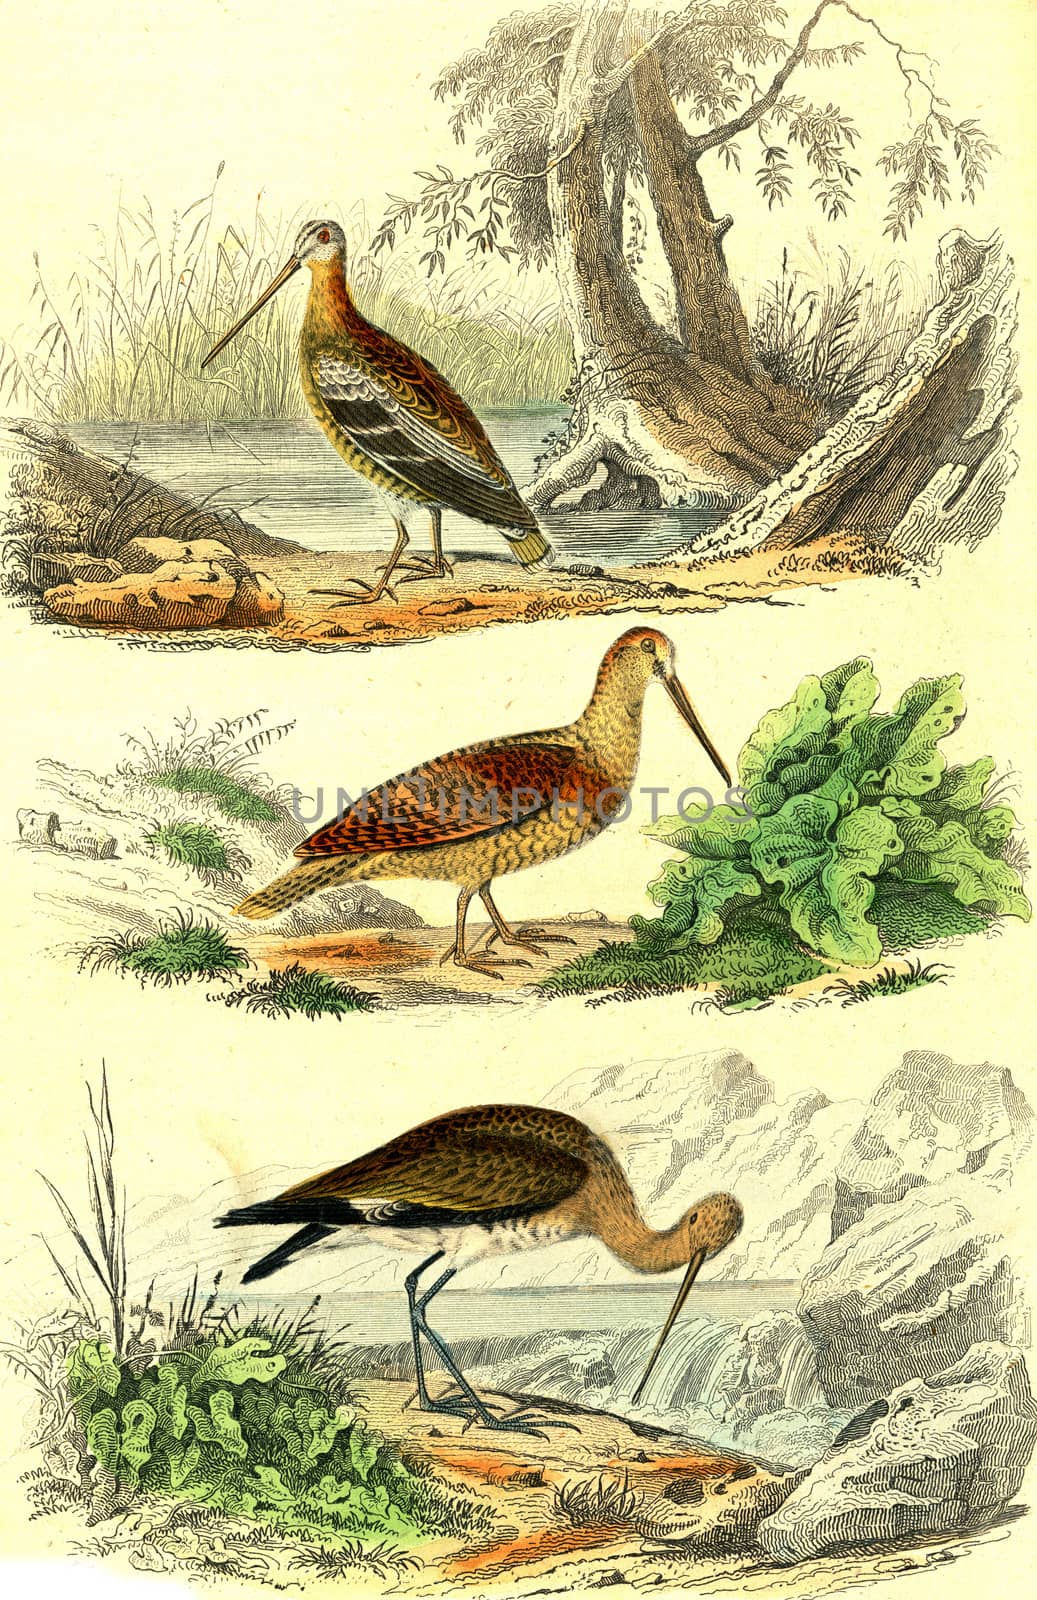 Snipe, The woodcock, The barge, vintage engraved illustration. From Buffon Complete Work.
